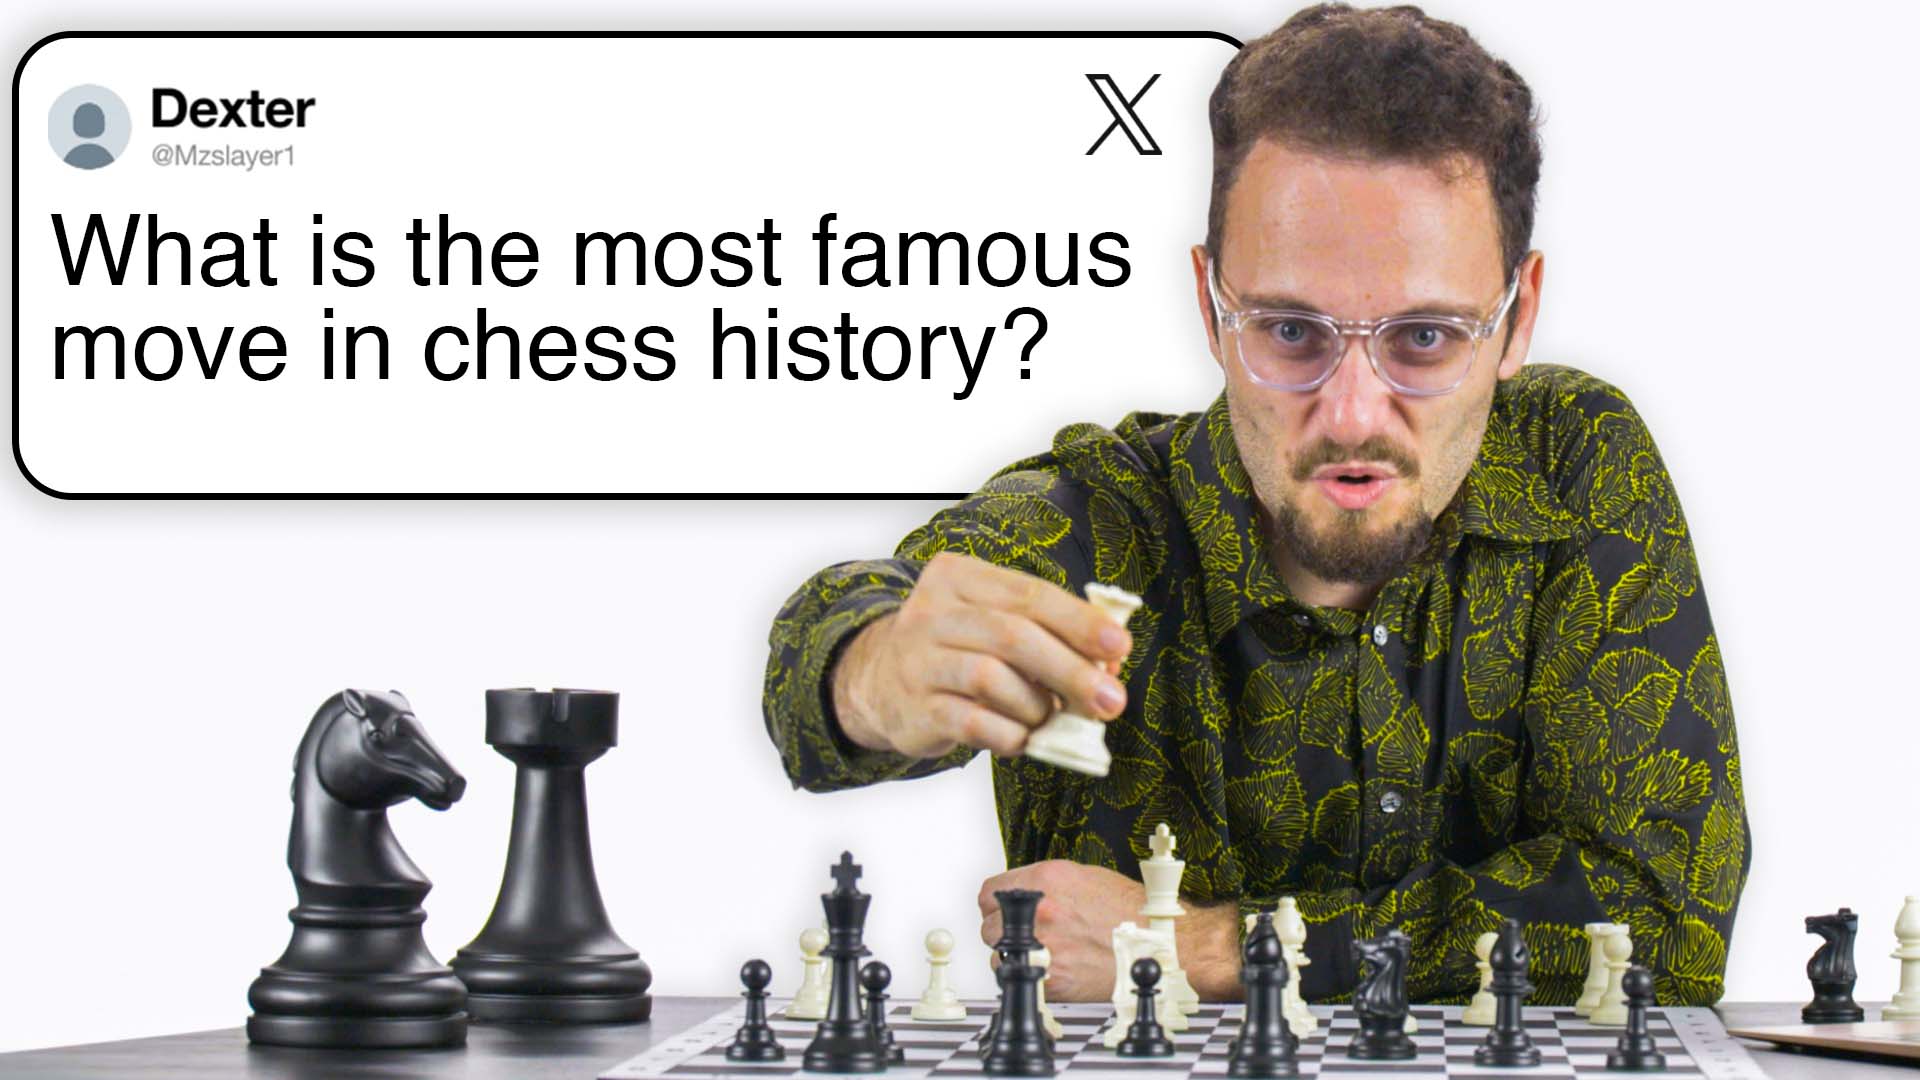 Why is it more usual for attacking chess players such as Mikhail